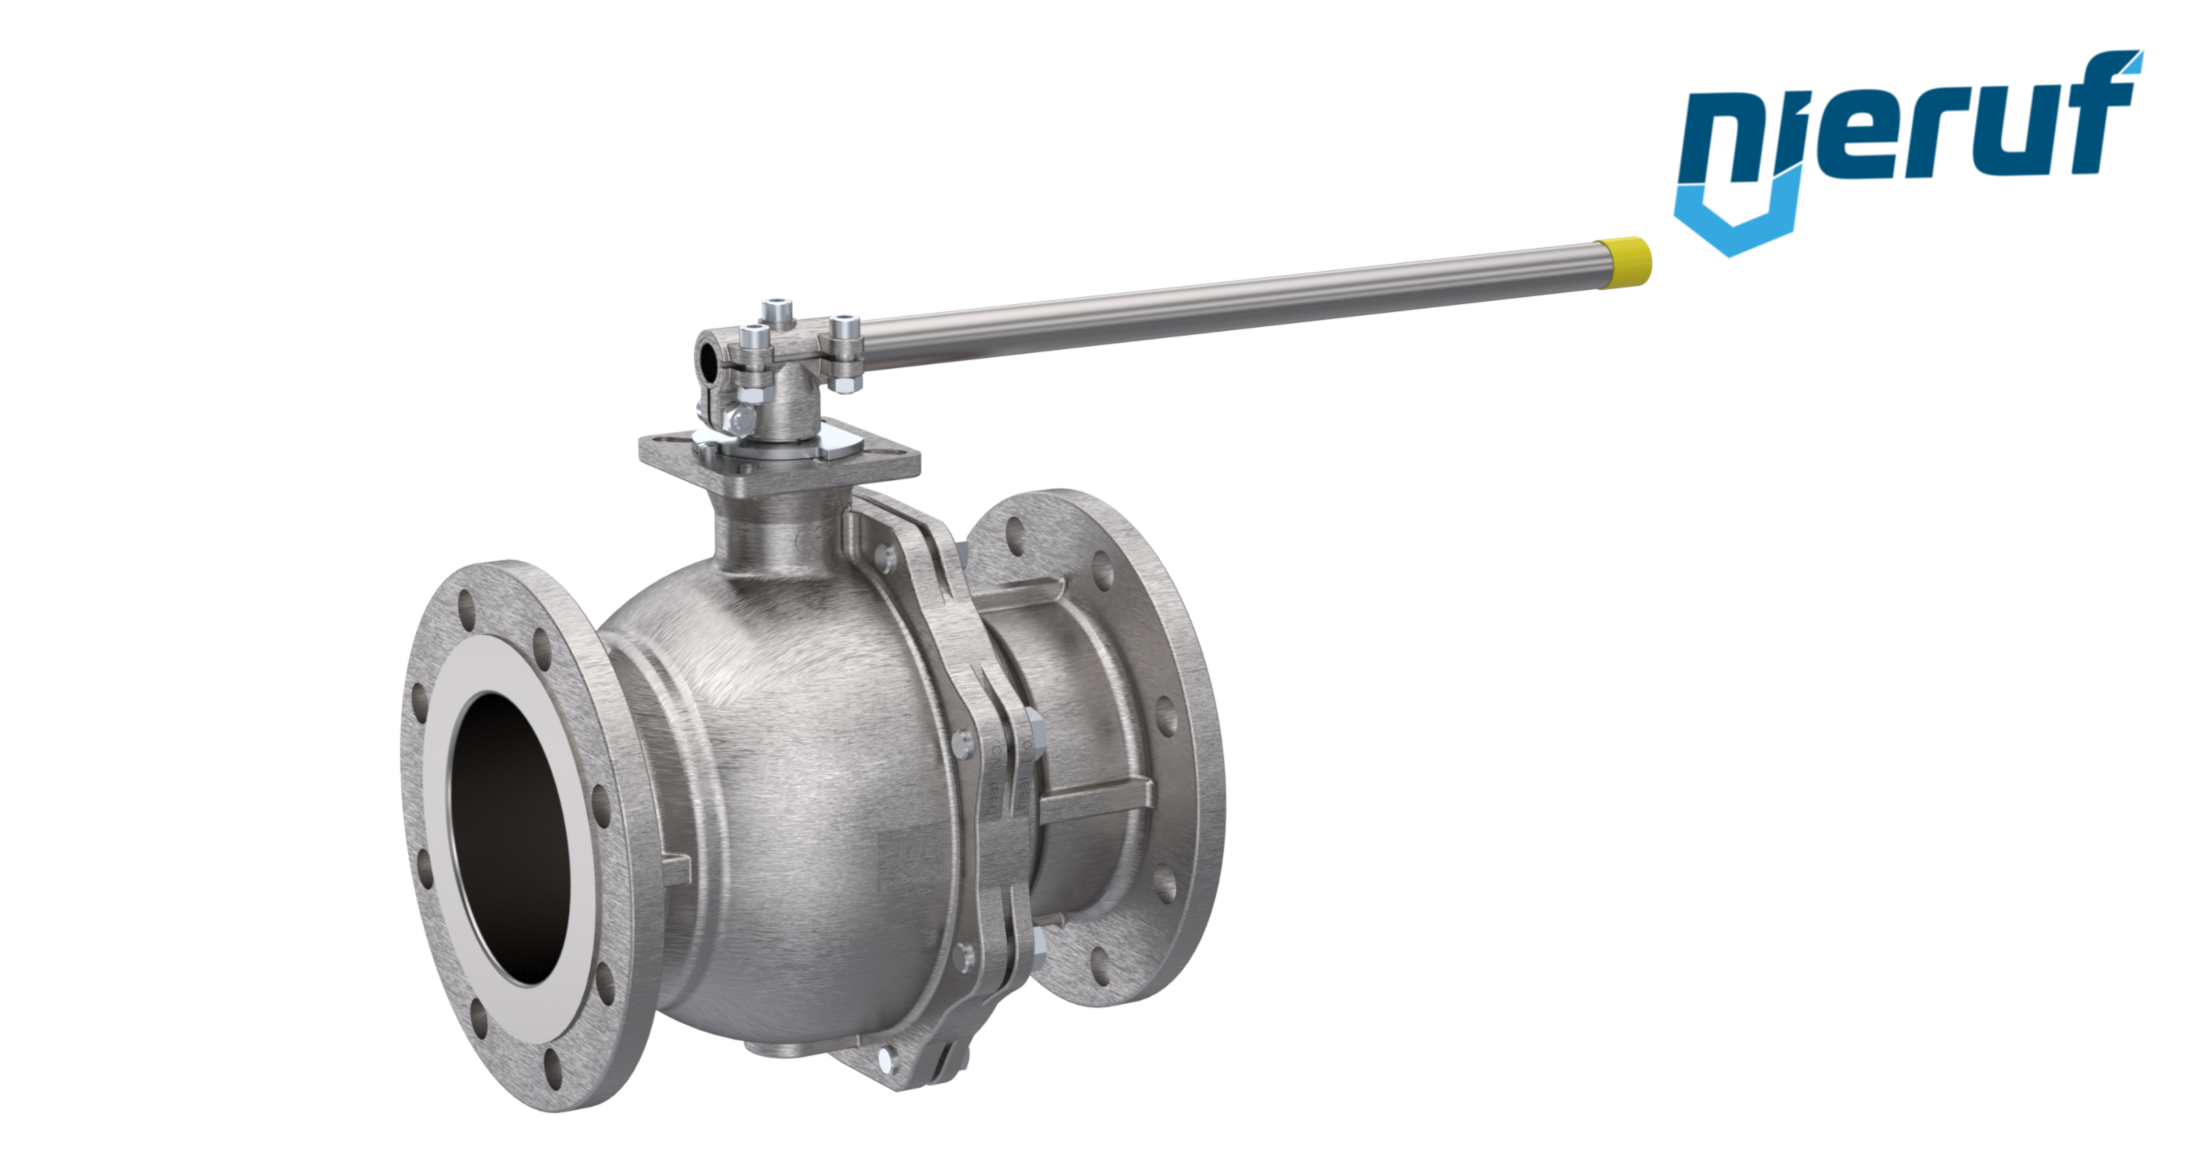 high temperature flange ball valve FK05 DN100 PN16 made of stainless steel 1.4408 up to +300